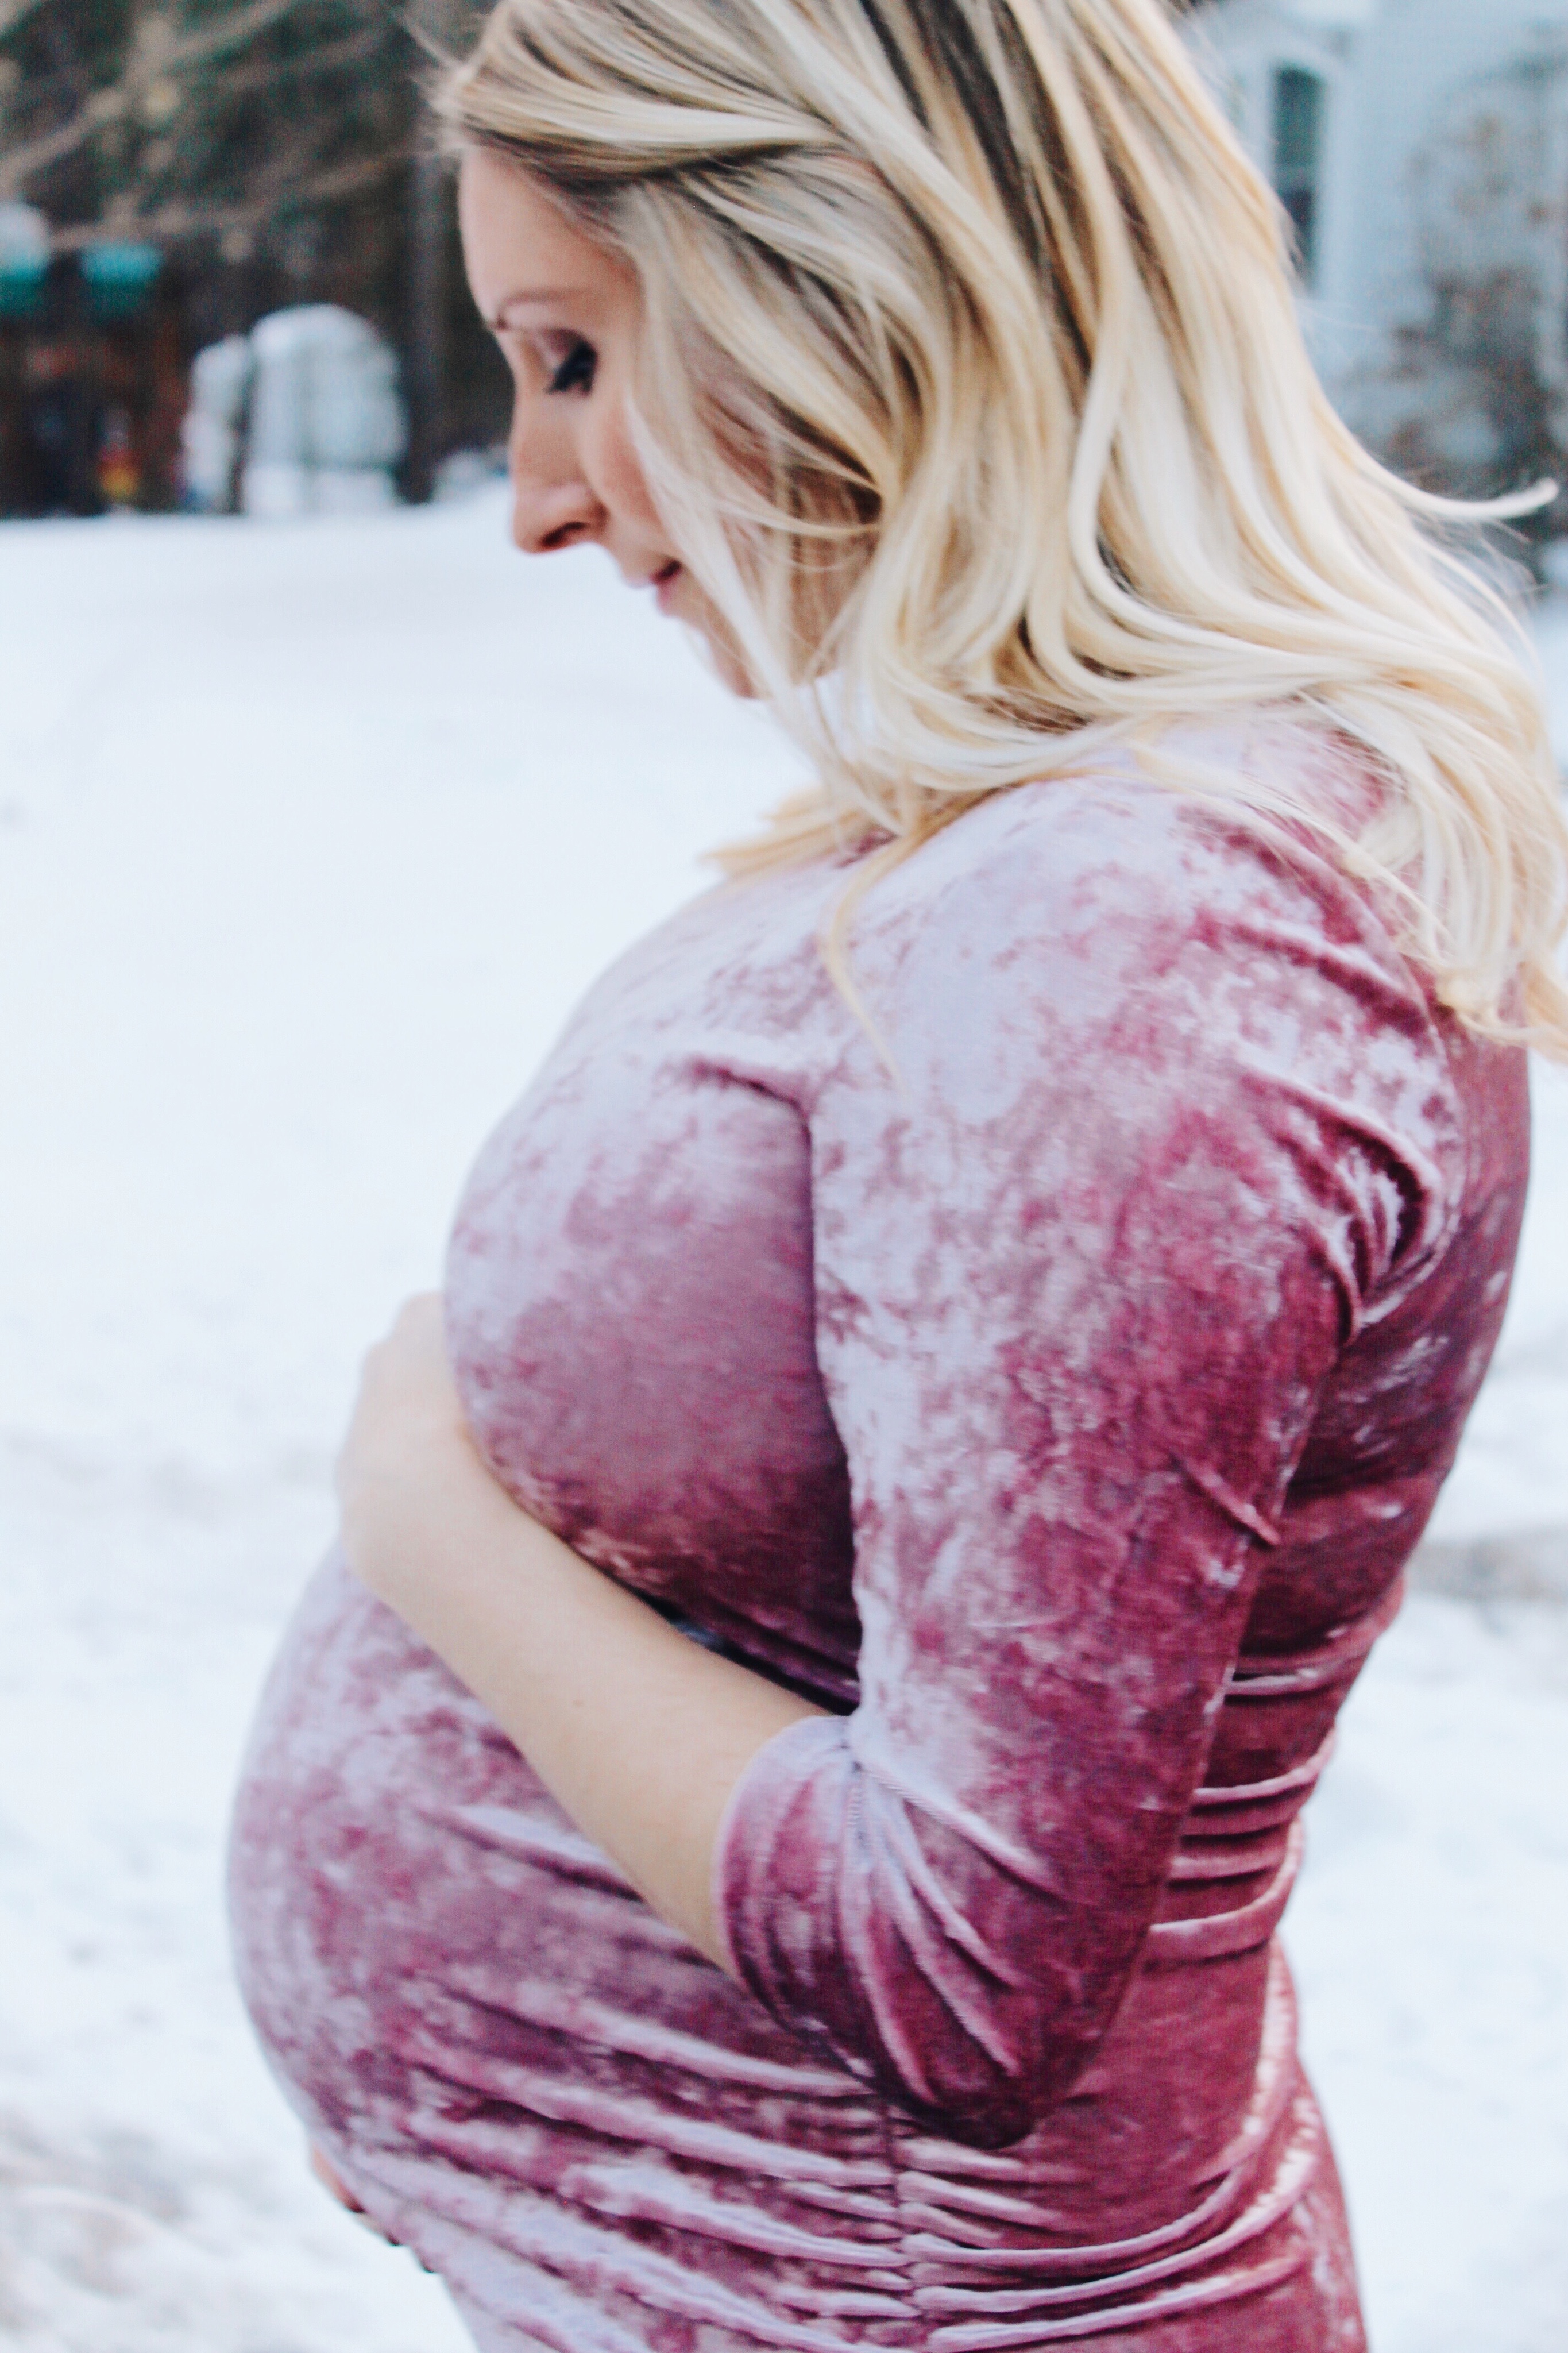 Pretty pink crushed velvet fitted maternity dress from Pink Blush is perfect to wear to your baby shower | Market Street Petite blog